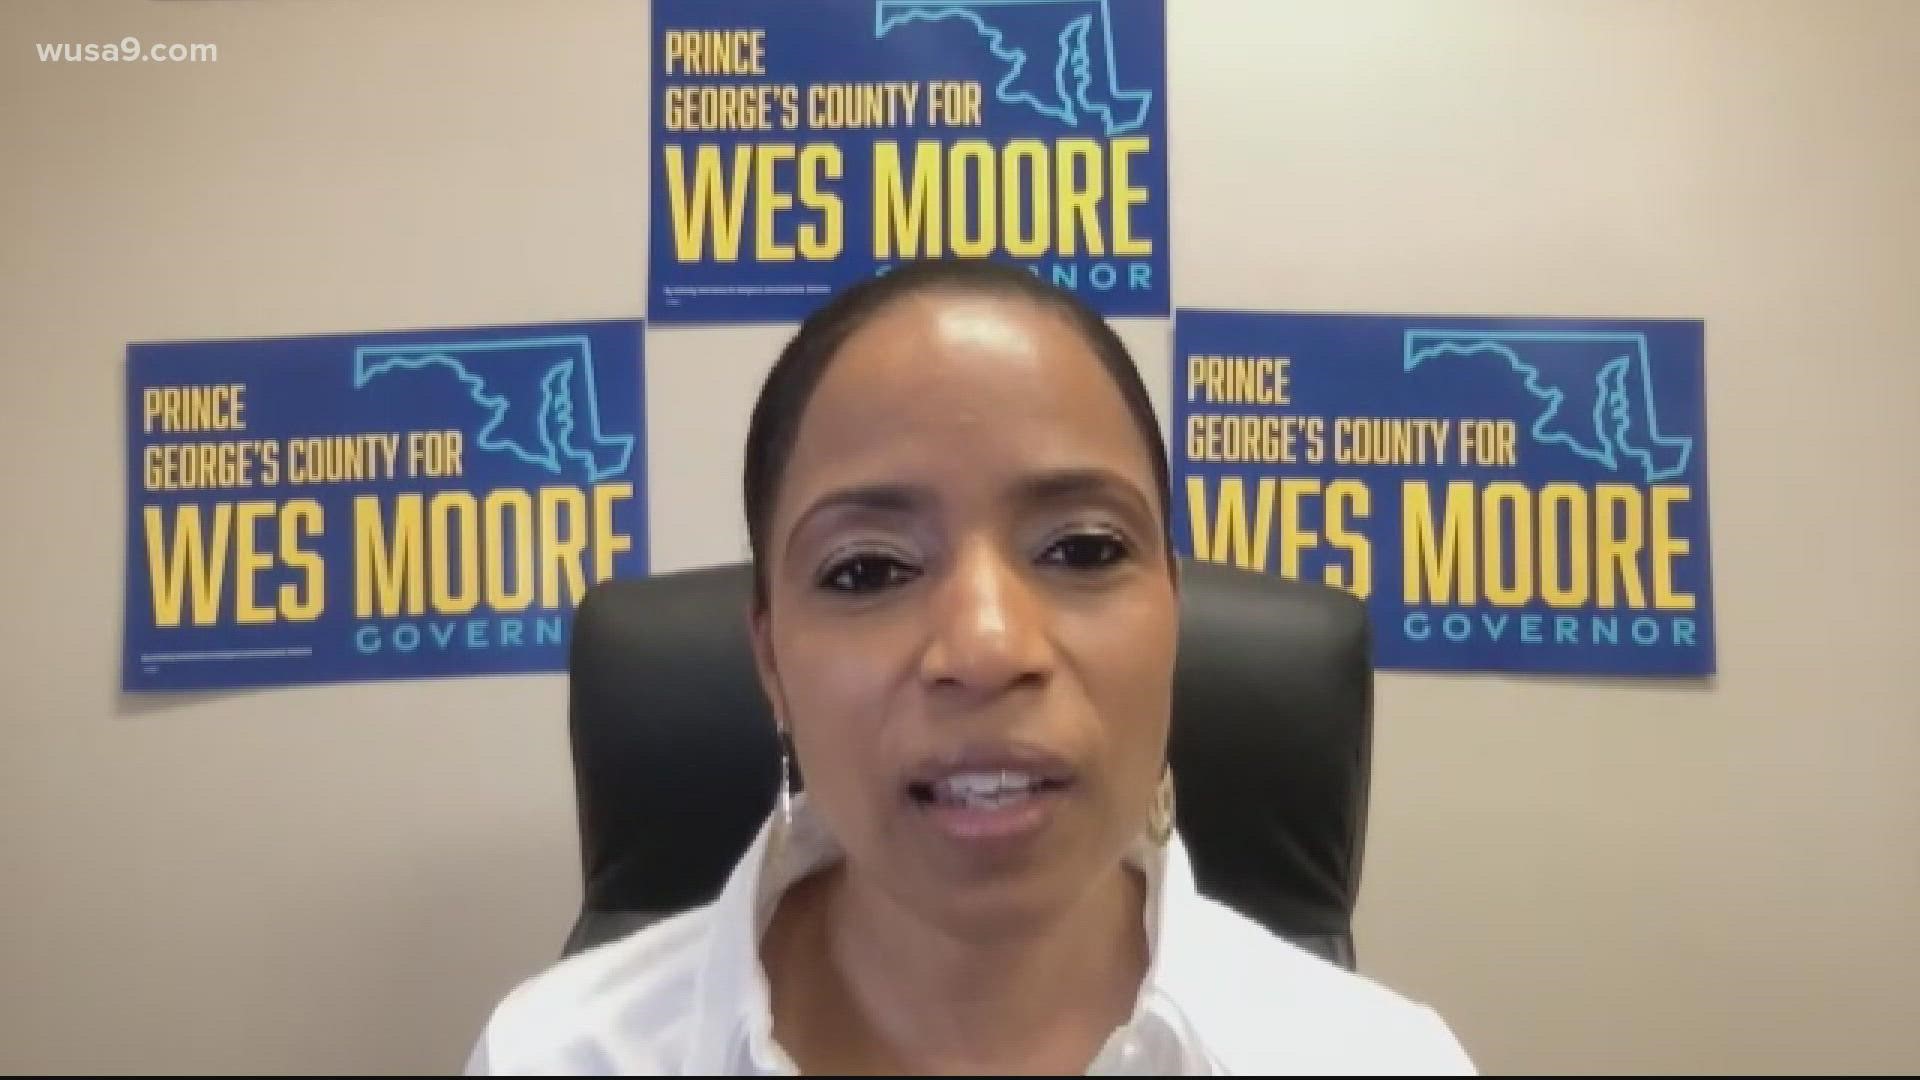 Angela Alsobrooks spoke to WUSA9 exclusively about why she endorsed Democrat Wes Moore. The endorsement is a blow to former PG County Executive Rushern Baker.